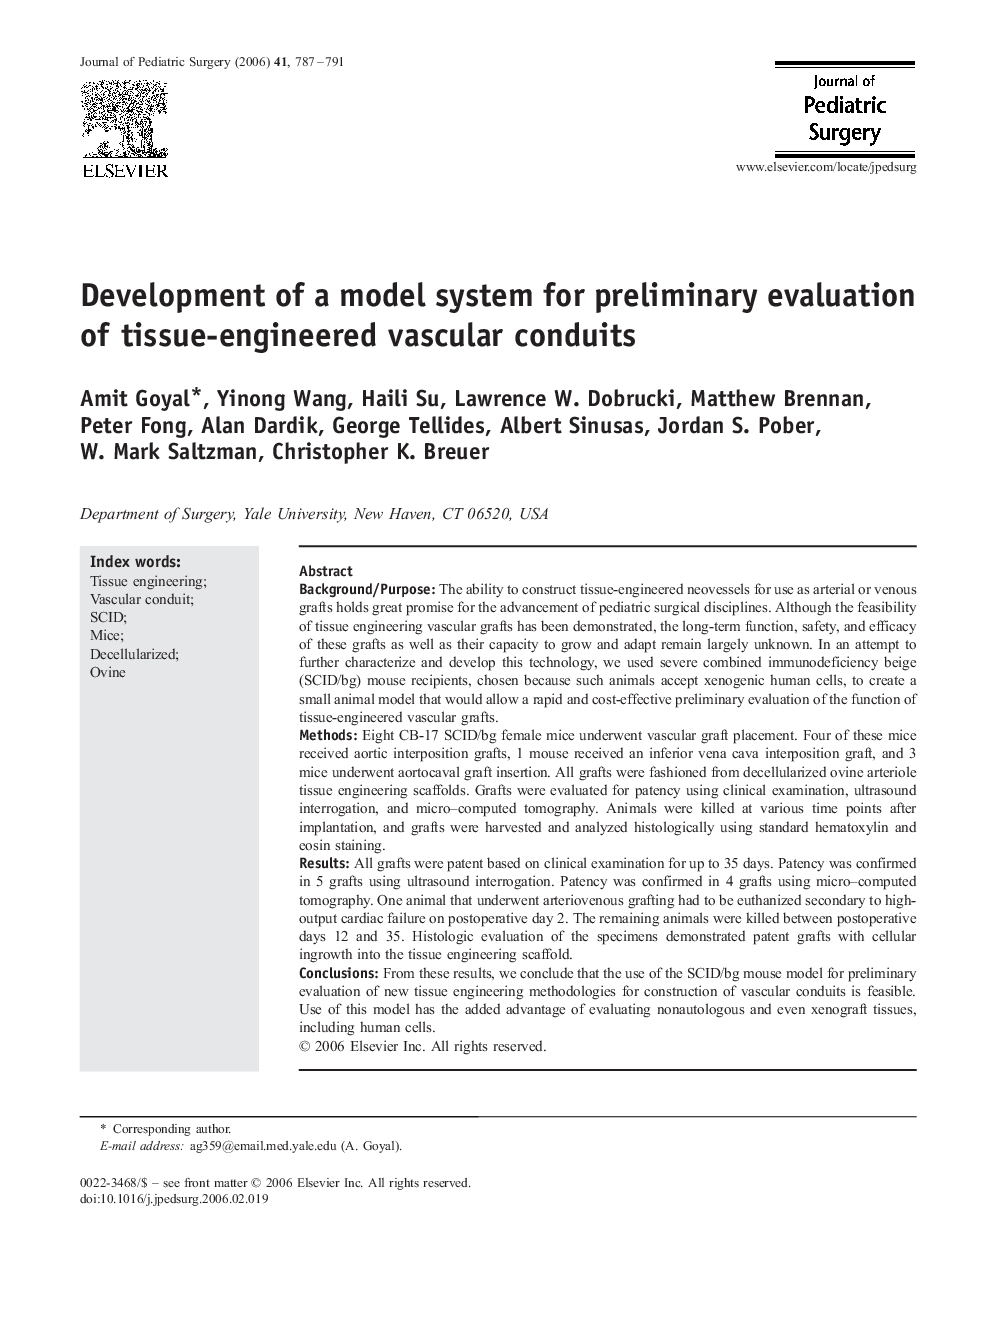 Development of a model system for preliminary evaluation of tissue-engineered vascular conduits